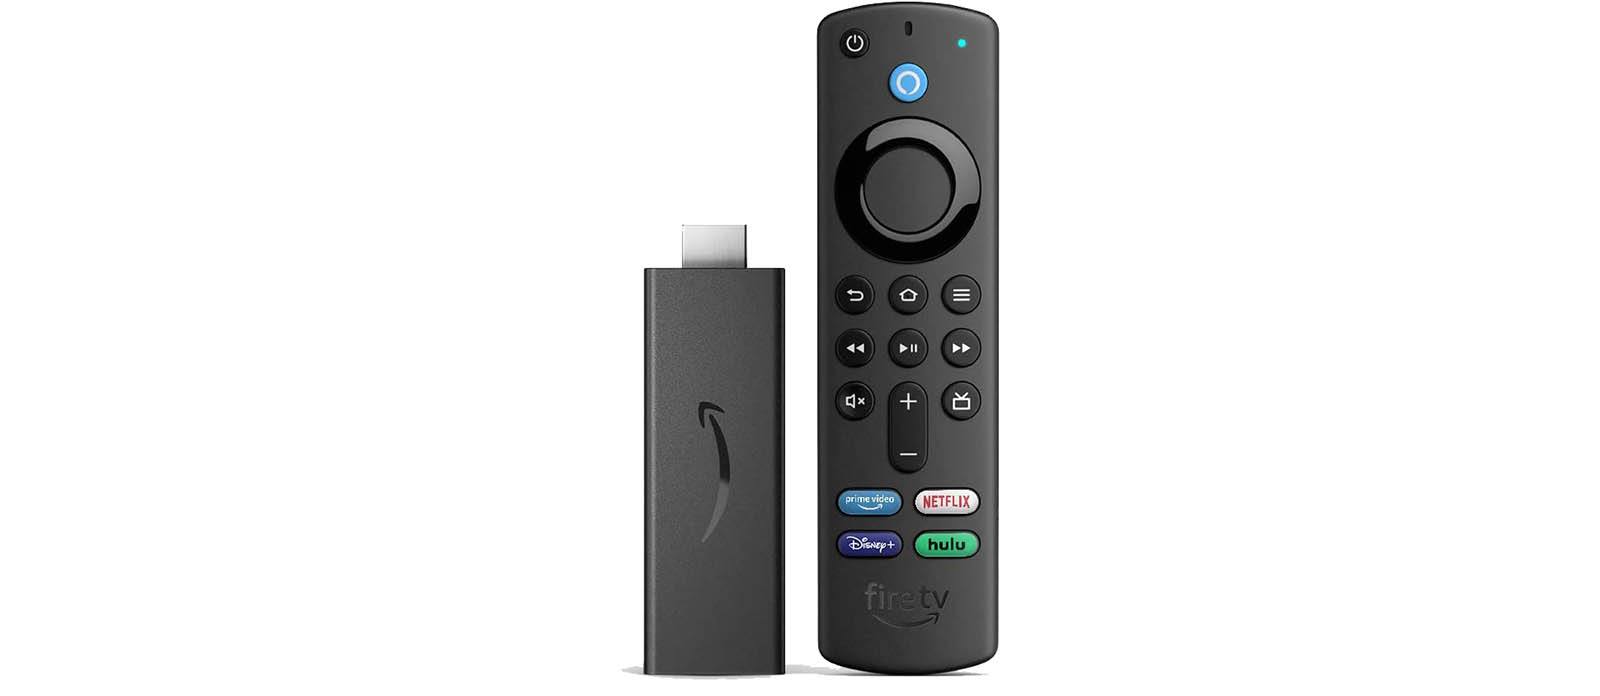 Amazon’s New Remote Is Also Available Via Third-Gen Fire TV Stick Bundle